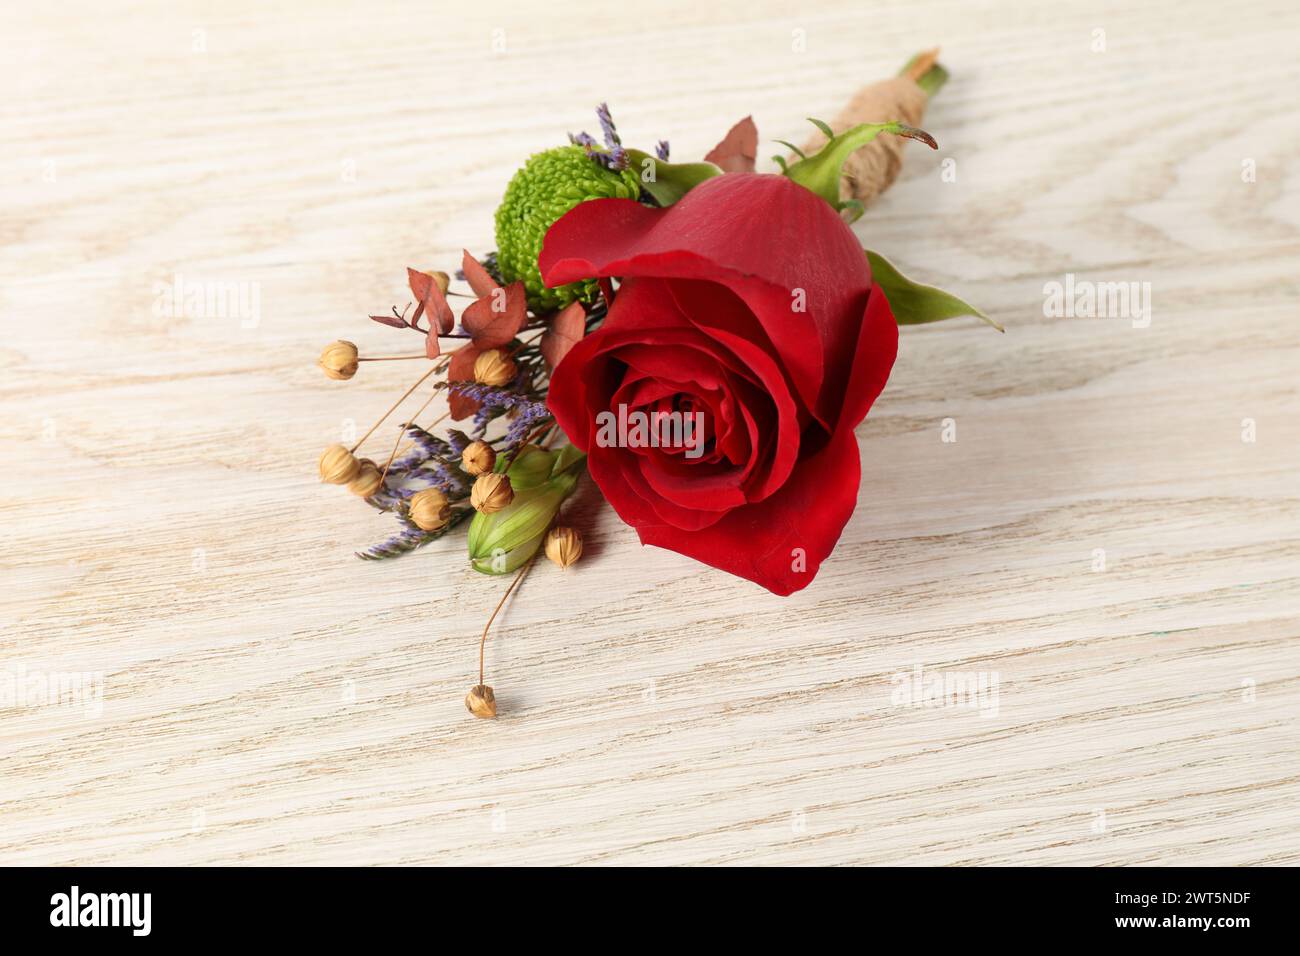 Stylish boutonniere with red rose on light wooden table, closeup Stock Photo